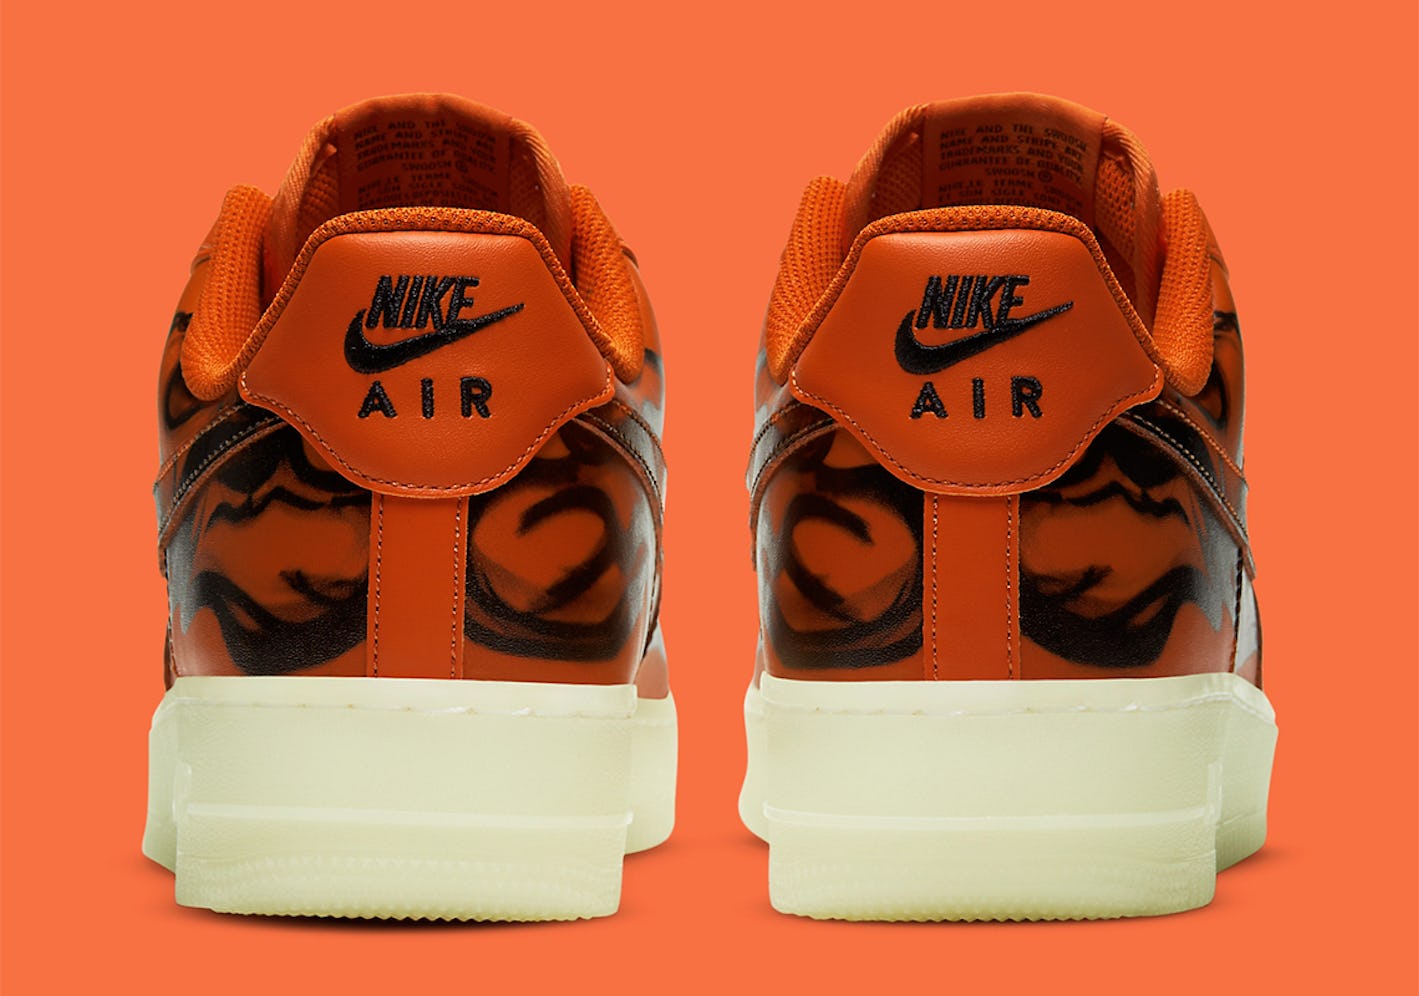 Nike's Halloween Air Force 1 glows in the dark and is covered in bones